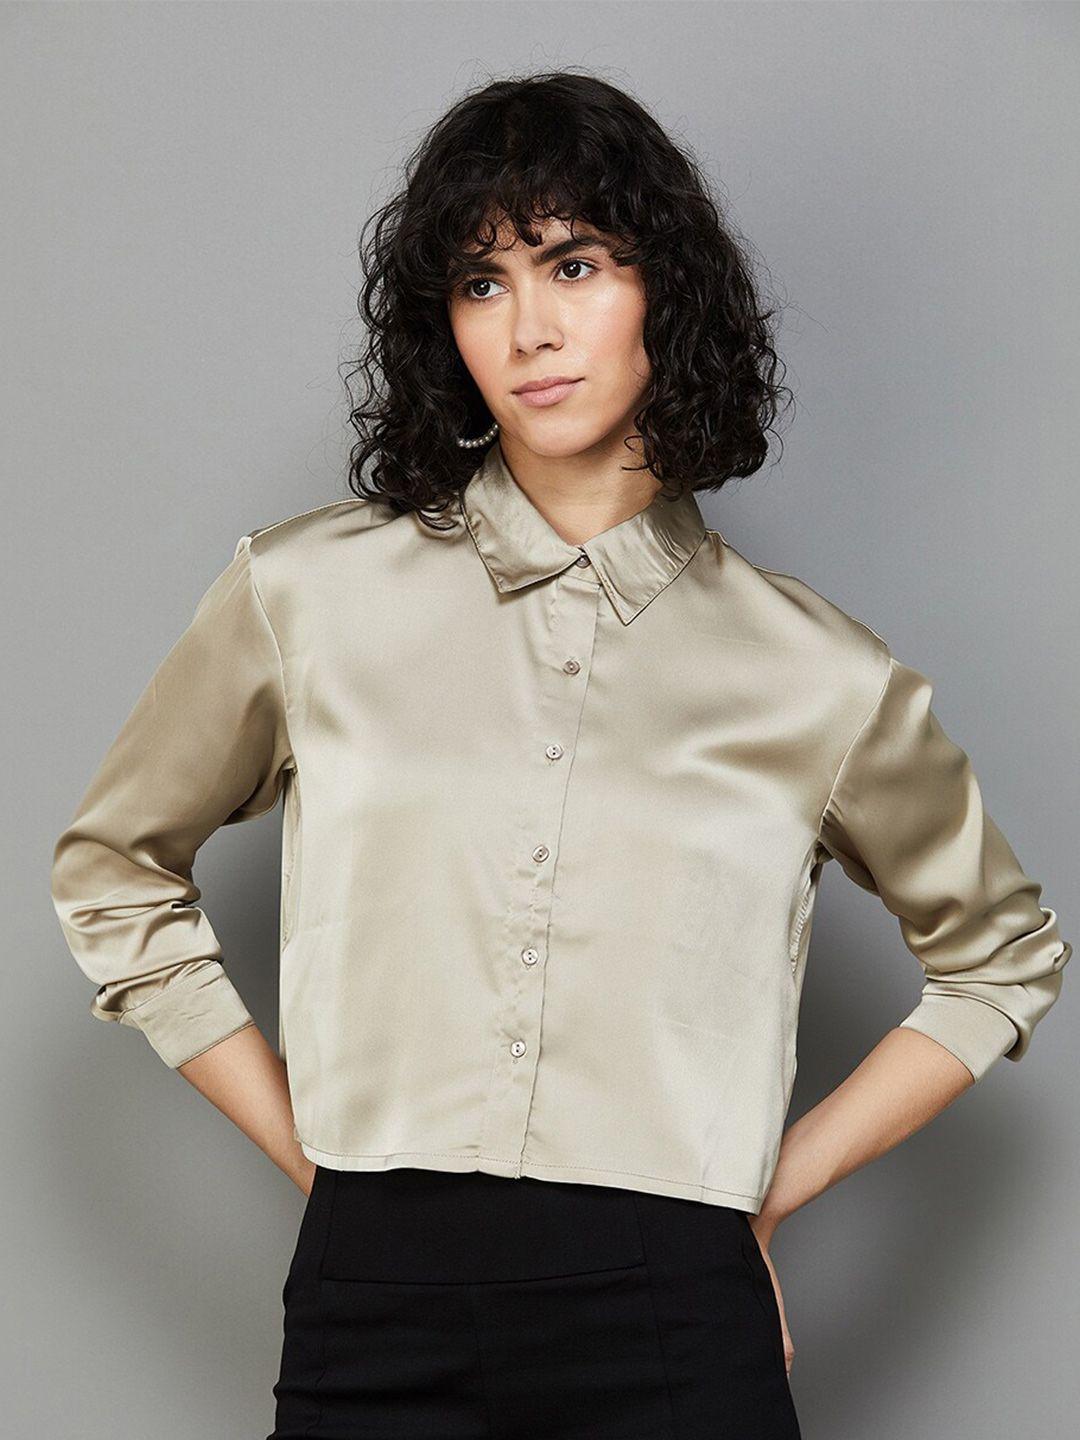 ginger by lifestyle shirt collar cuffed sleeves shirt style top